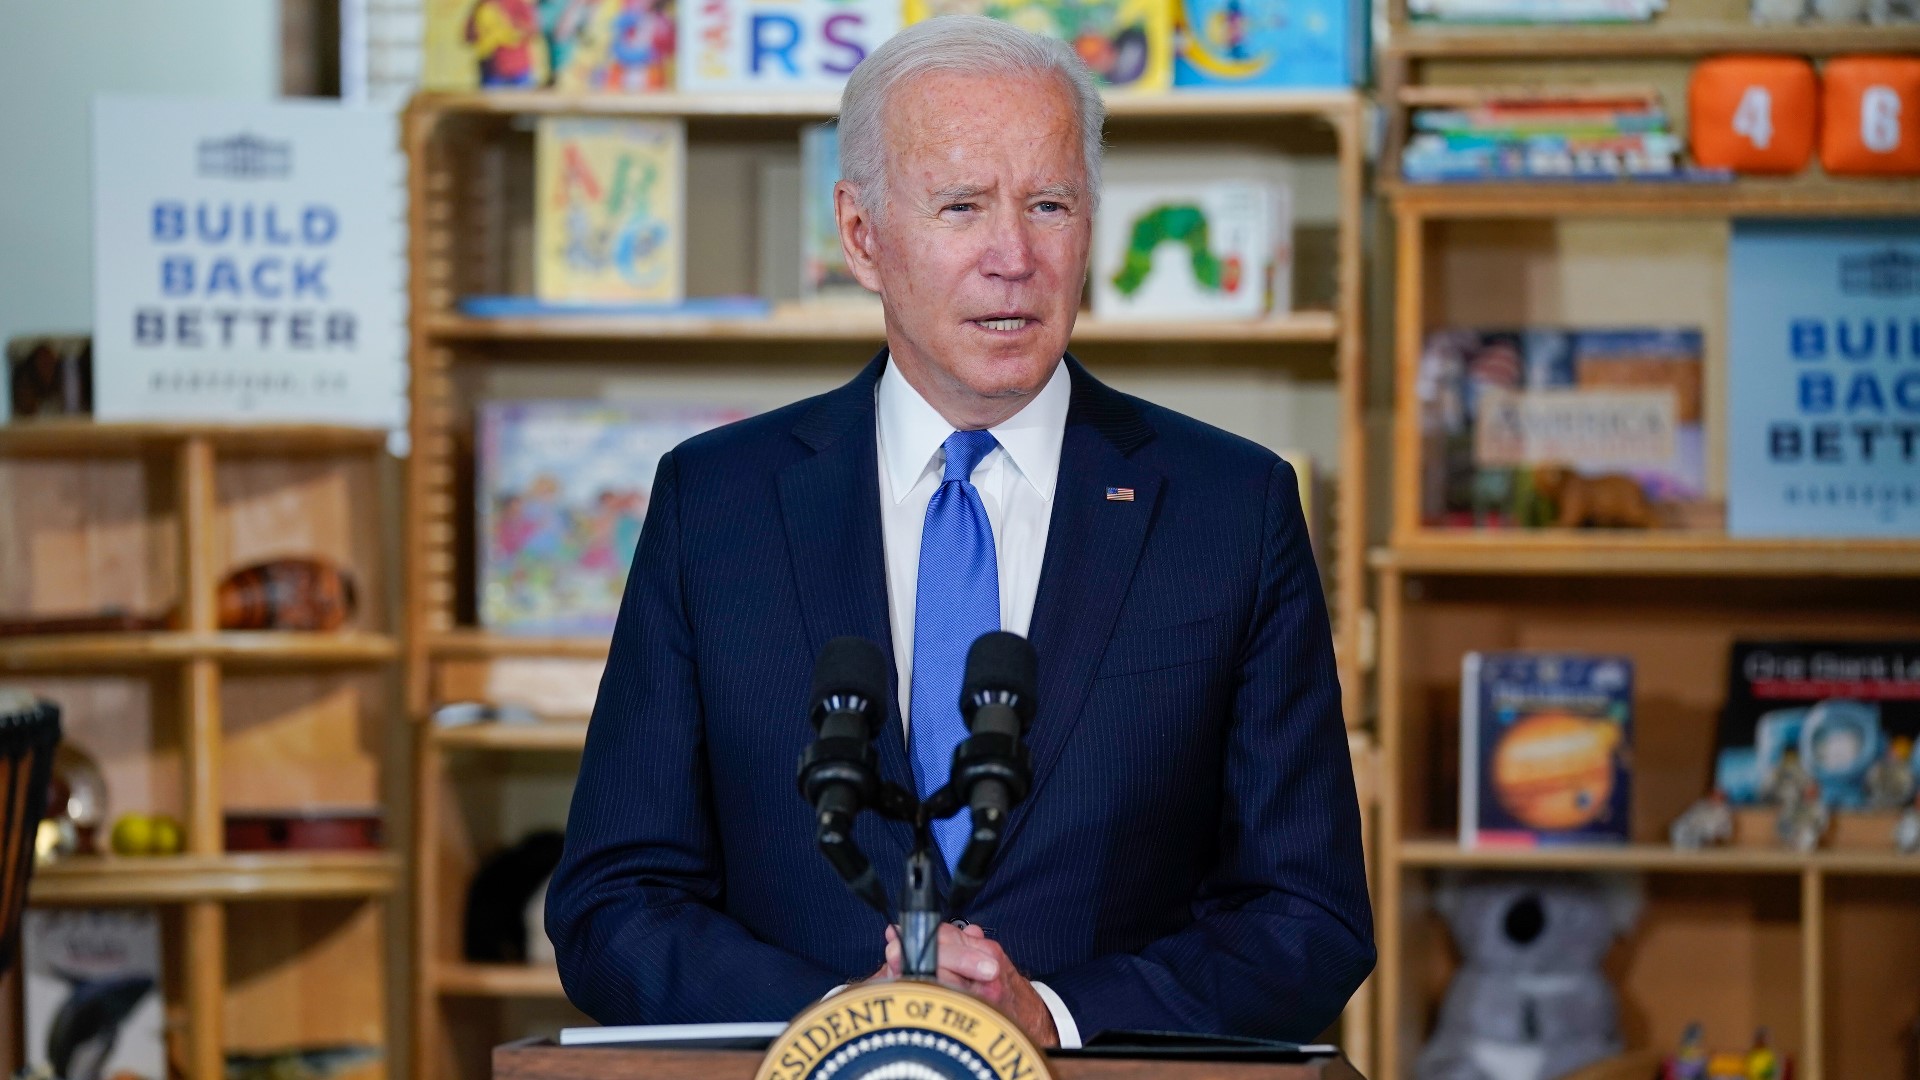 President Biden argued that investments in child care and other social safety net programs are imperative to keep America competitive.